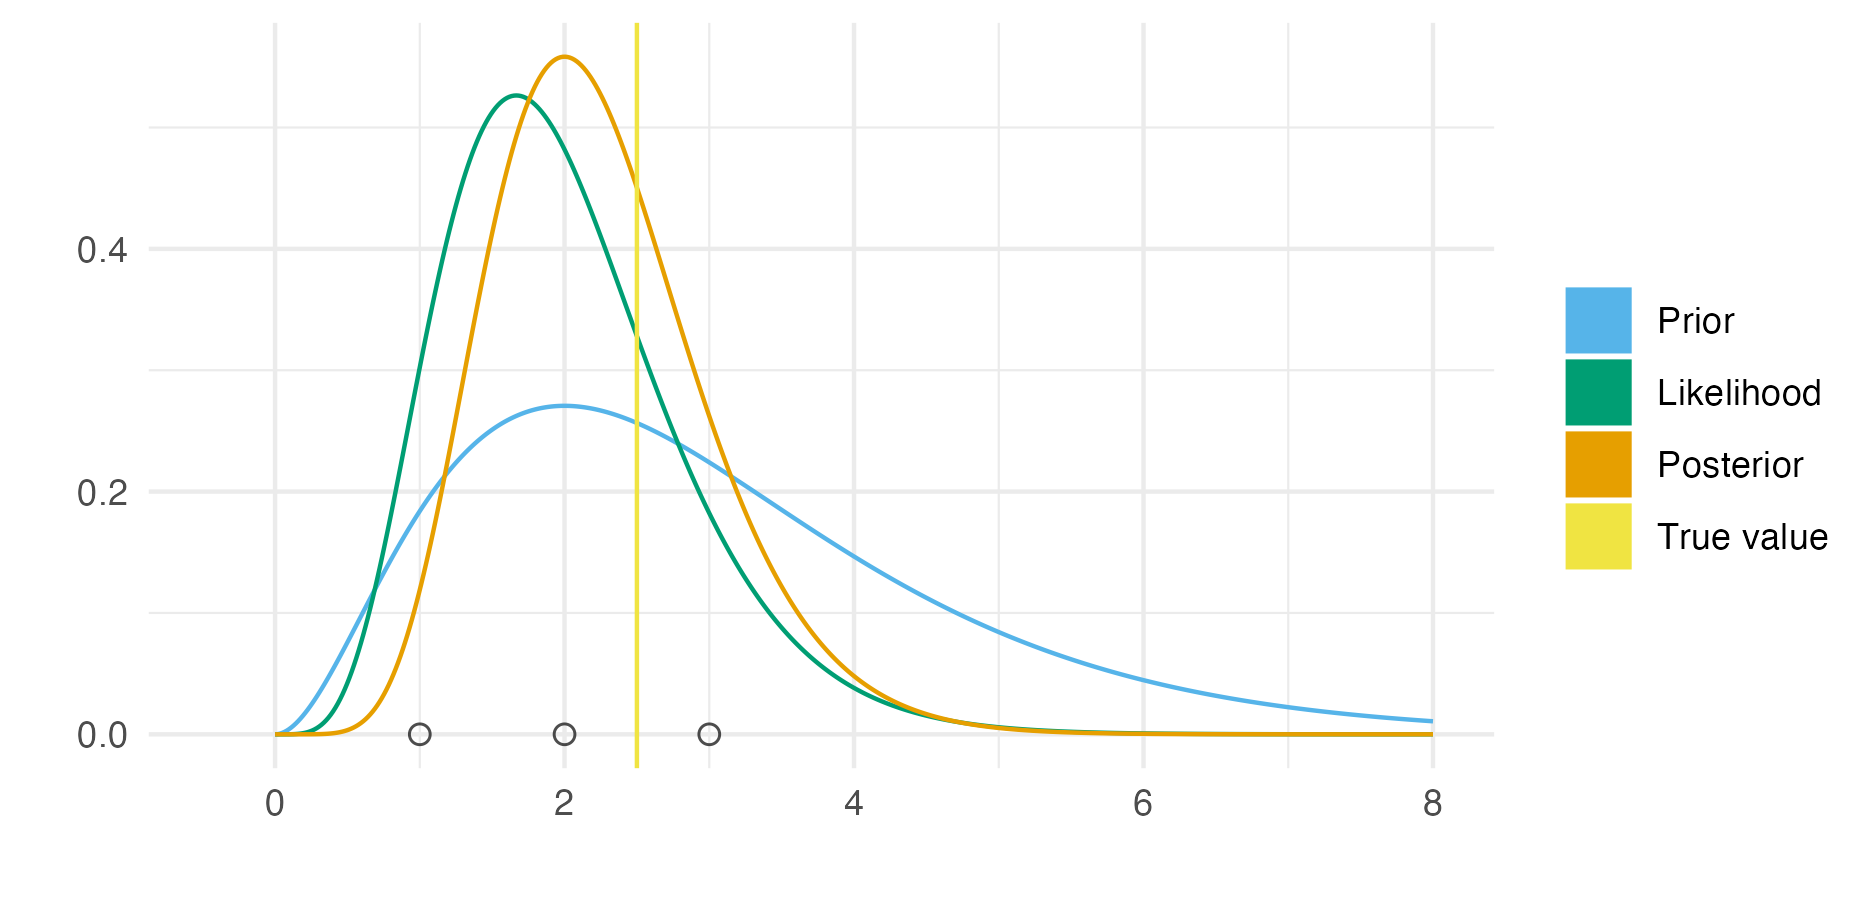 An example of Bayesian modelling and computation for a simple one parameter model. Here the likelihood is \(y_i \sim \text{Poisson}(\phi)\) for \(i = 1, 2, 3\) and the prior distribution on the rate parameter \(\phi > 0\) is \(\phi \sim \text{Gamma}(3, 1)\). Observed data \(\mathbf{y} = (1, 2, 3)\) was simulated from the distribution \(\text{Poisson}(2.5)\). As such, the true data generating process is within the space of models being considered. This situation is sometimes known (Bernardo and Smith 2001) as the \(\mathcal{M}\)-closed world, in contrast to the \(\mathcal{M}\)-open world where the model is said to be misspecified. Further, the posterior distribution is available in closed form as \(\text{Gamma}(9, 4)\). This is because the posterior distribution is in the same family of probability distributions as the prior distribution. Models of this kind are described as being conjugate. Conjugate models are often used because of their convenience. Though other models may be more suitable, Bayesian inference will typically be more computationally demanding than for conjugate models. The posterior distribution here is more tightly peaked than the prior distribution. Contraction of this kind is typical, but not always the case.